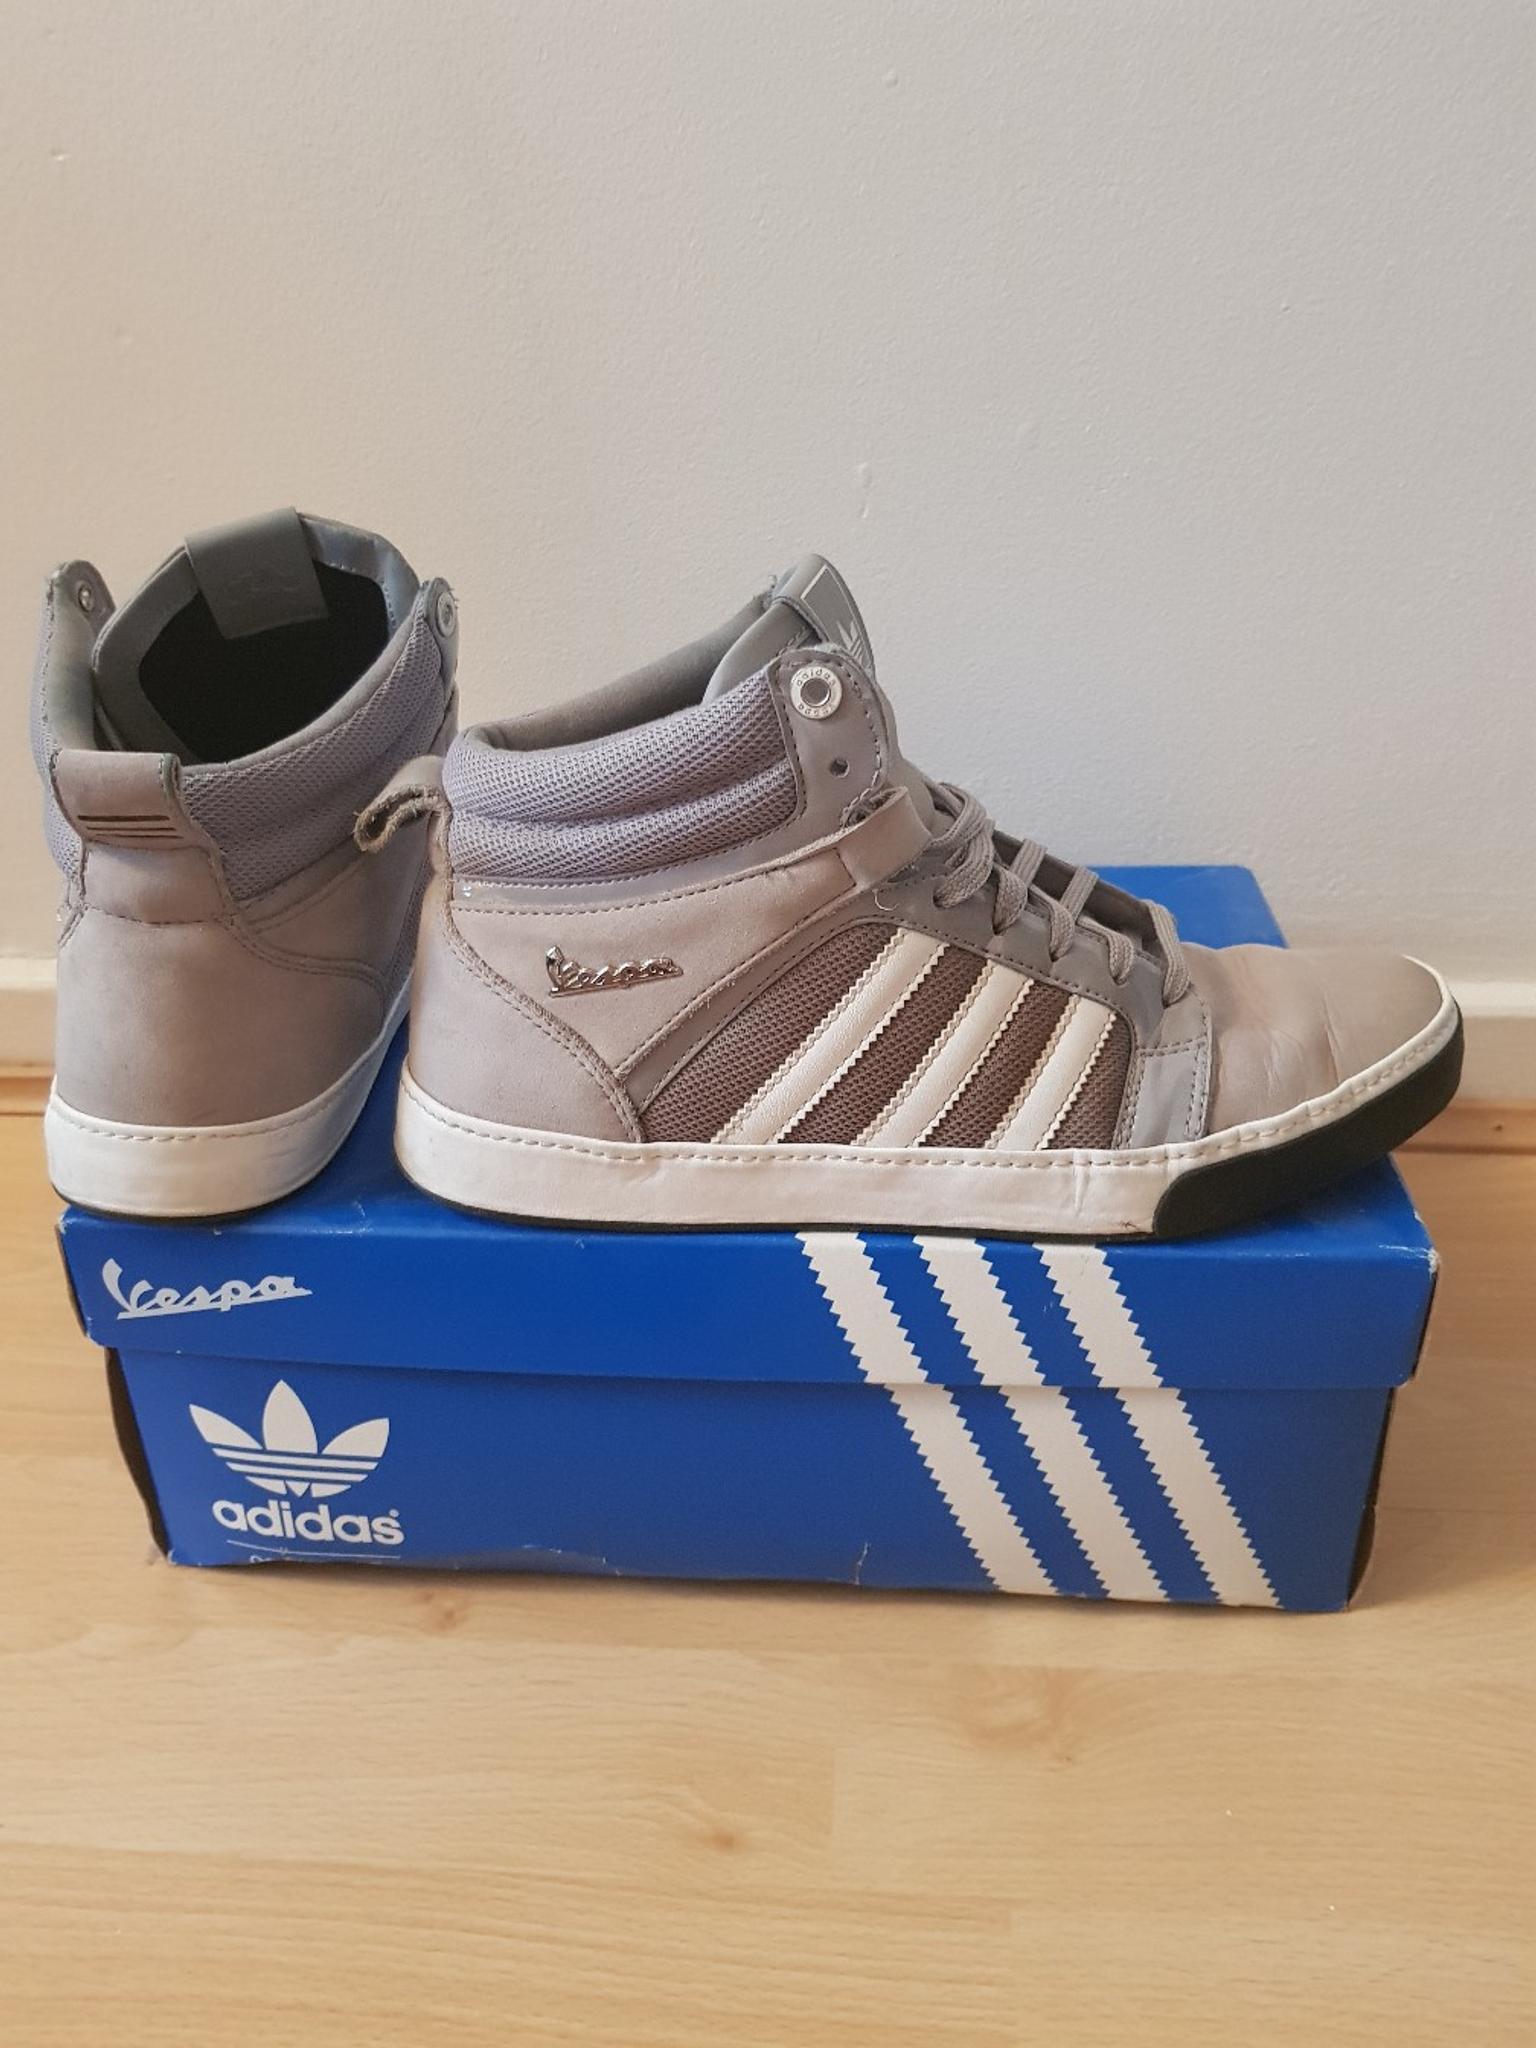 Adidas vespa hi top Trainers size 7 in 